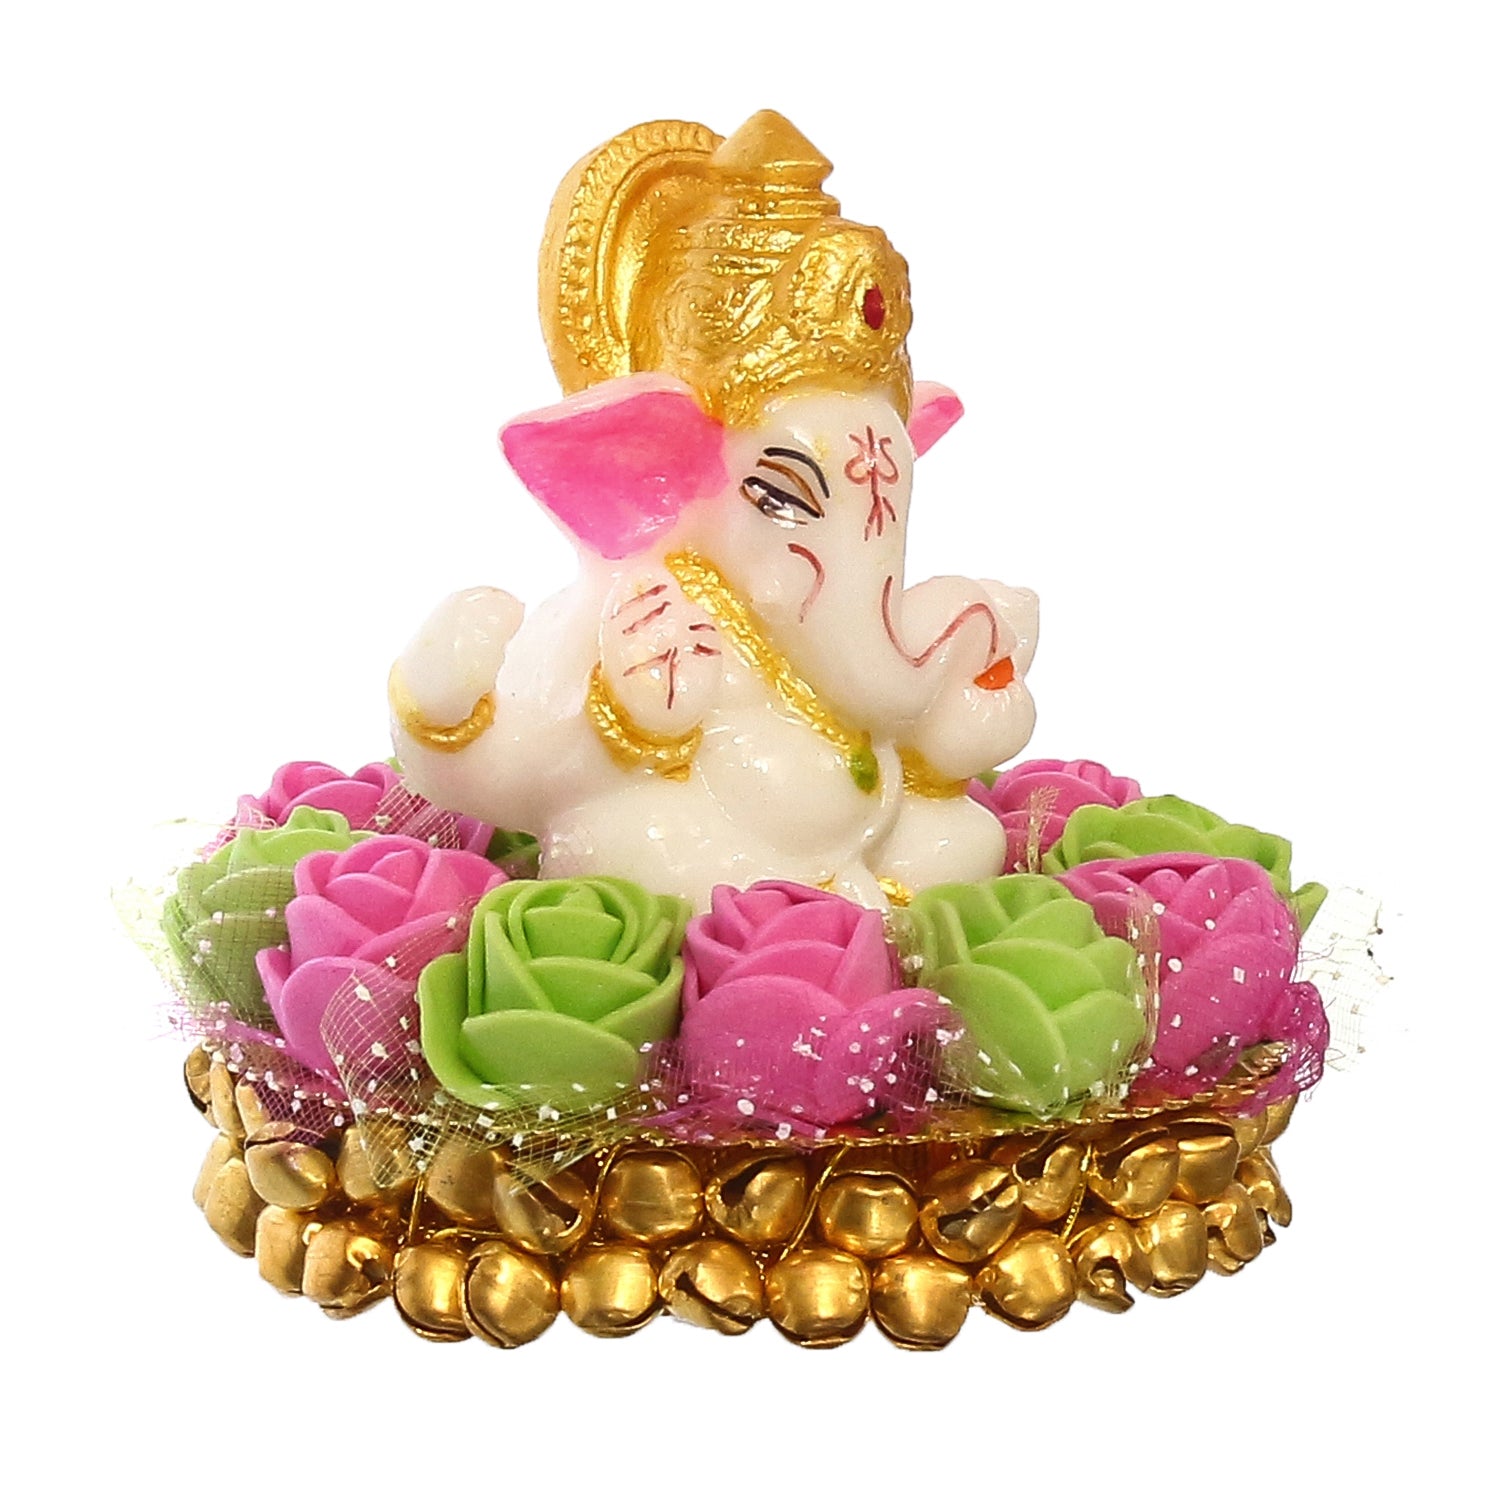 Golden and White Polyresin Lord Ganesha Idol on Decorative Pink and Green Flowers Plate 4